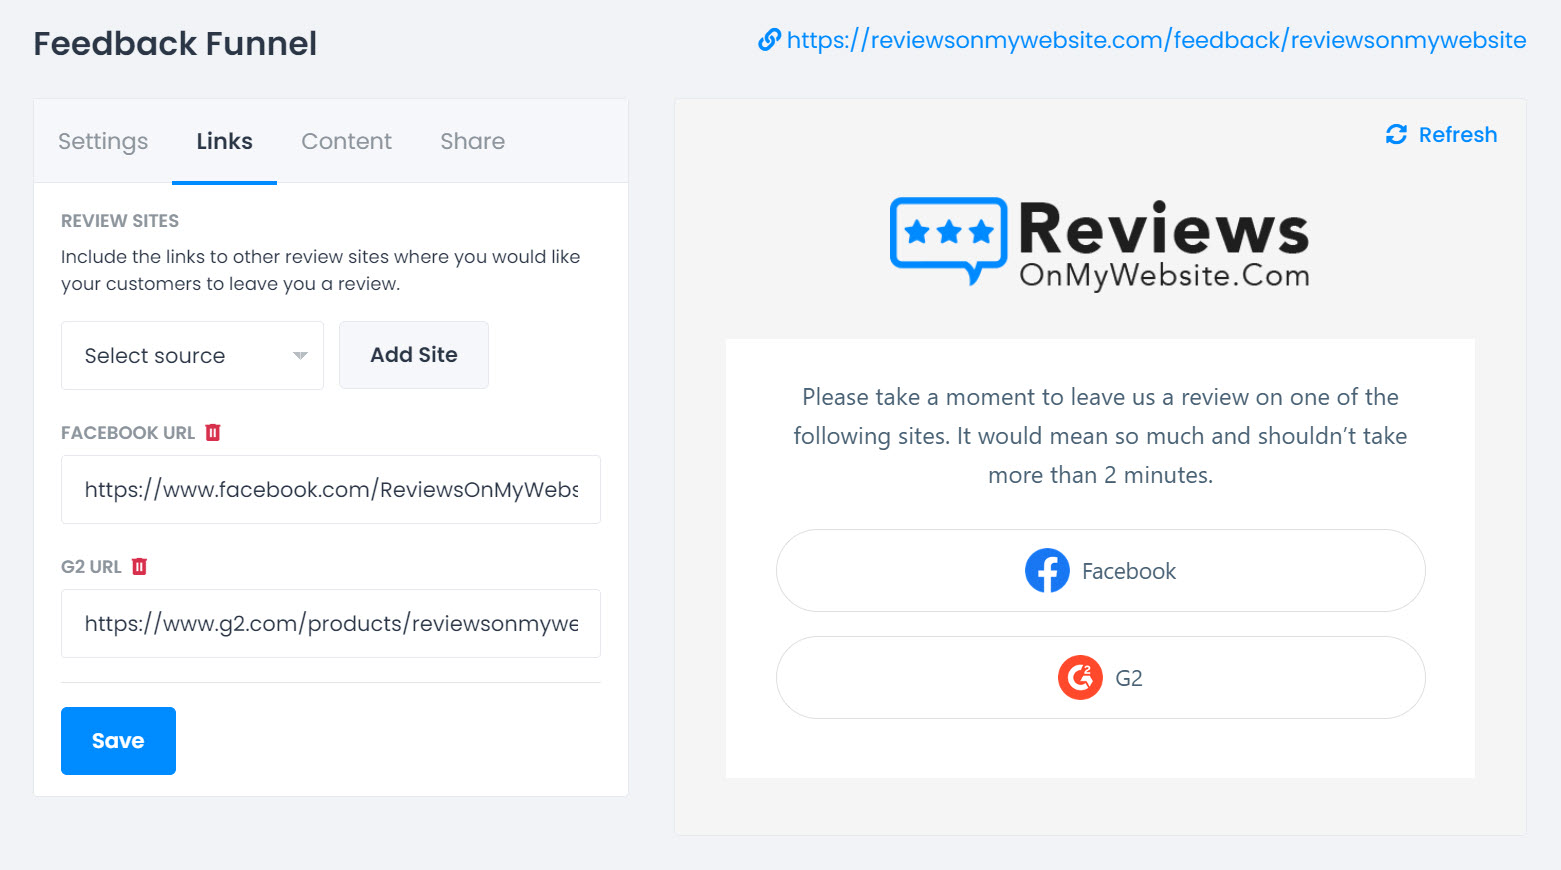 Feedback page to help collect customer reviews